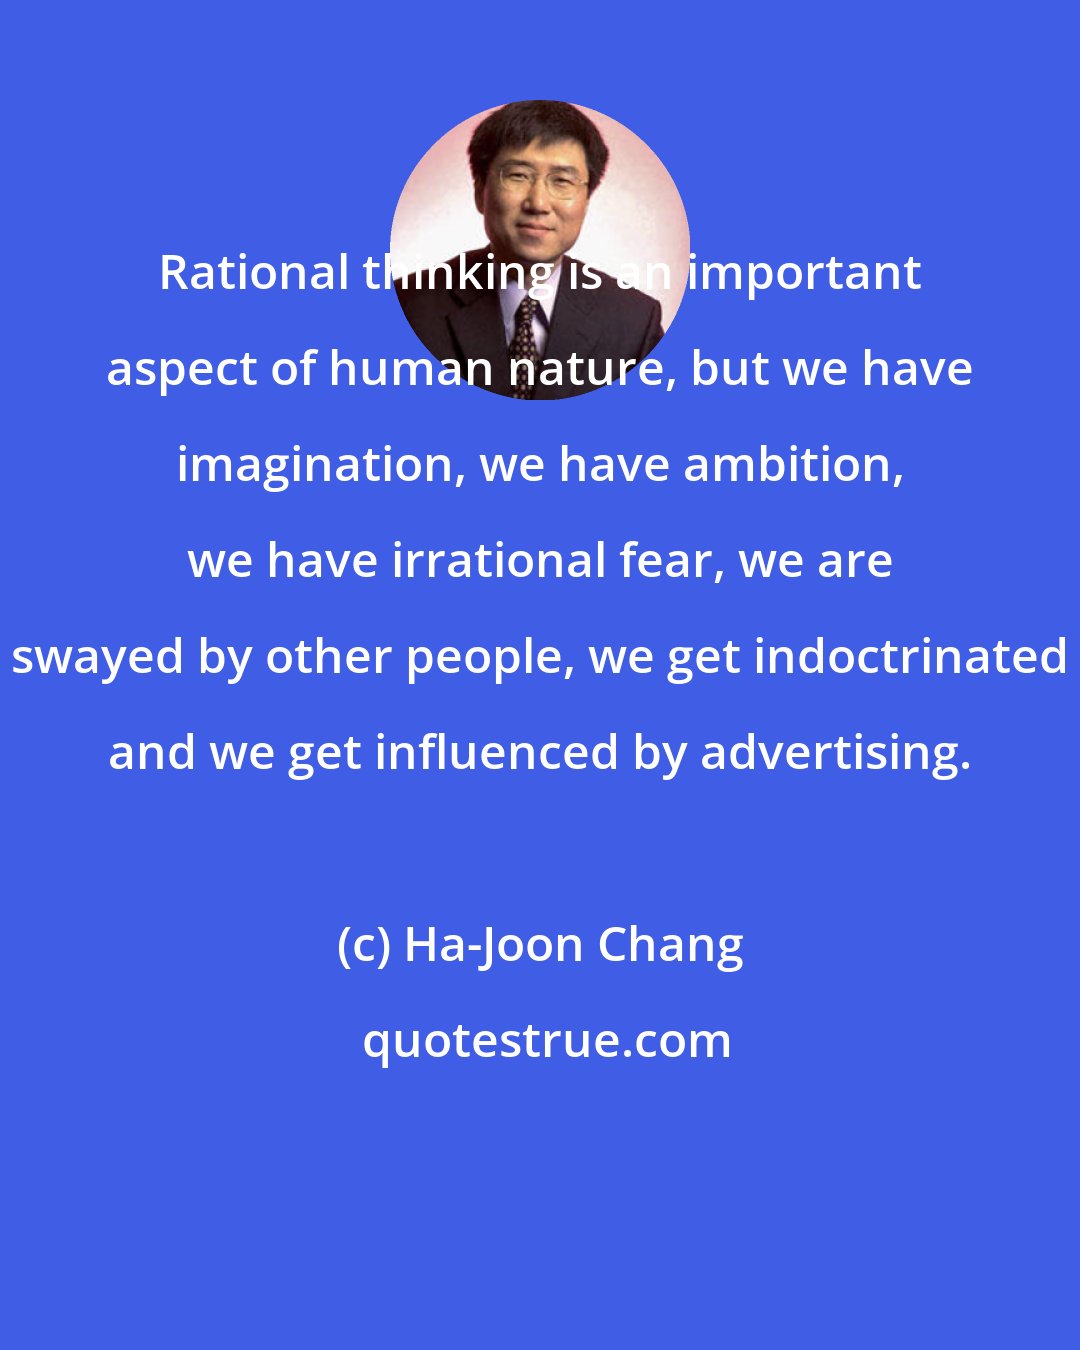 Ha-Joon Chang: Rational thinking is an important aspect of human nature, but we have imagination, we have ambition, we have irrational fear, we are swayed by other people, we get indoctrinated and we get influenced by advertising.